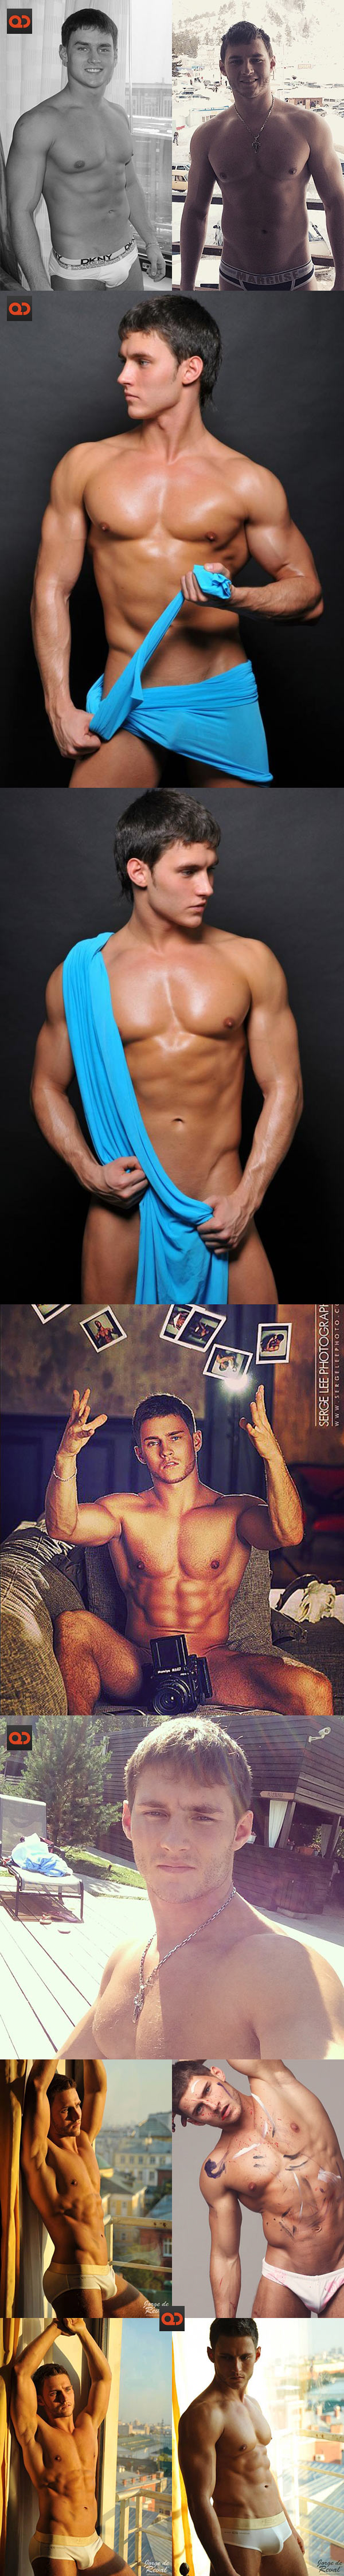 qc-scandal-model-anatoly-goncharov-exposed-collage03